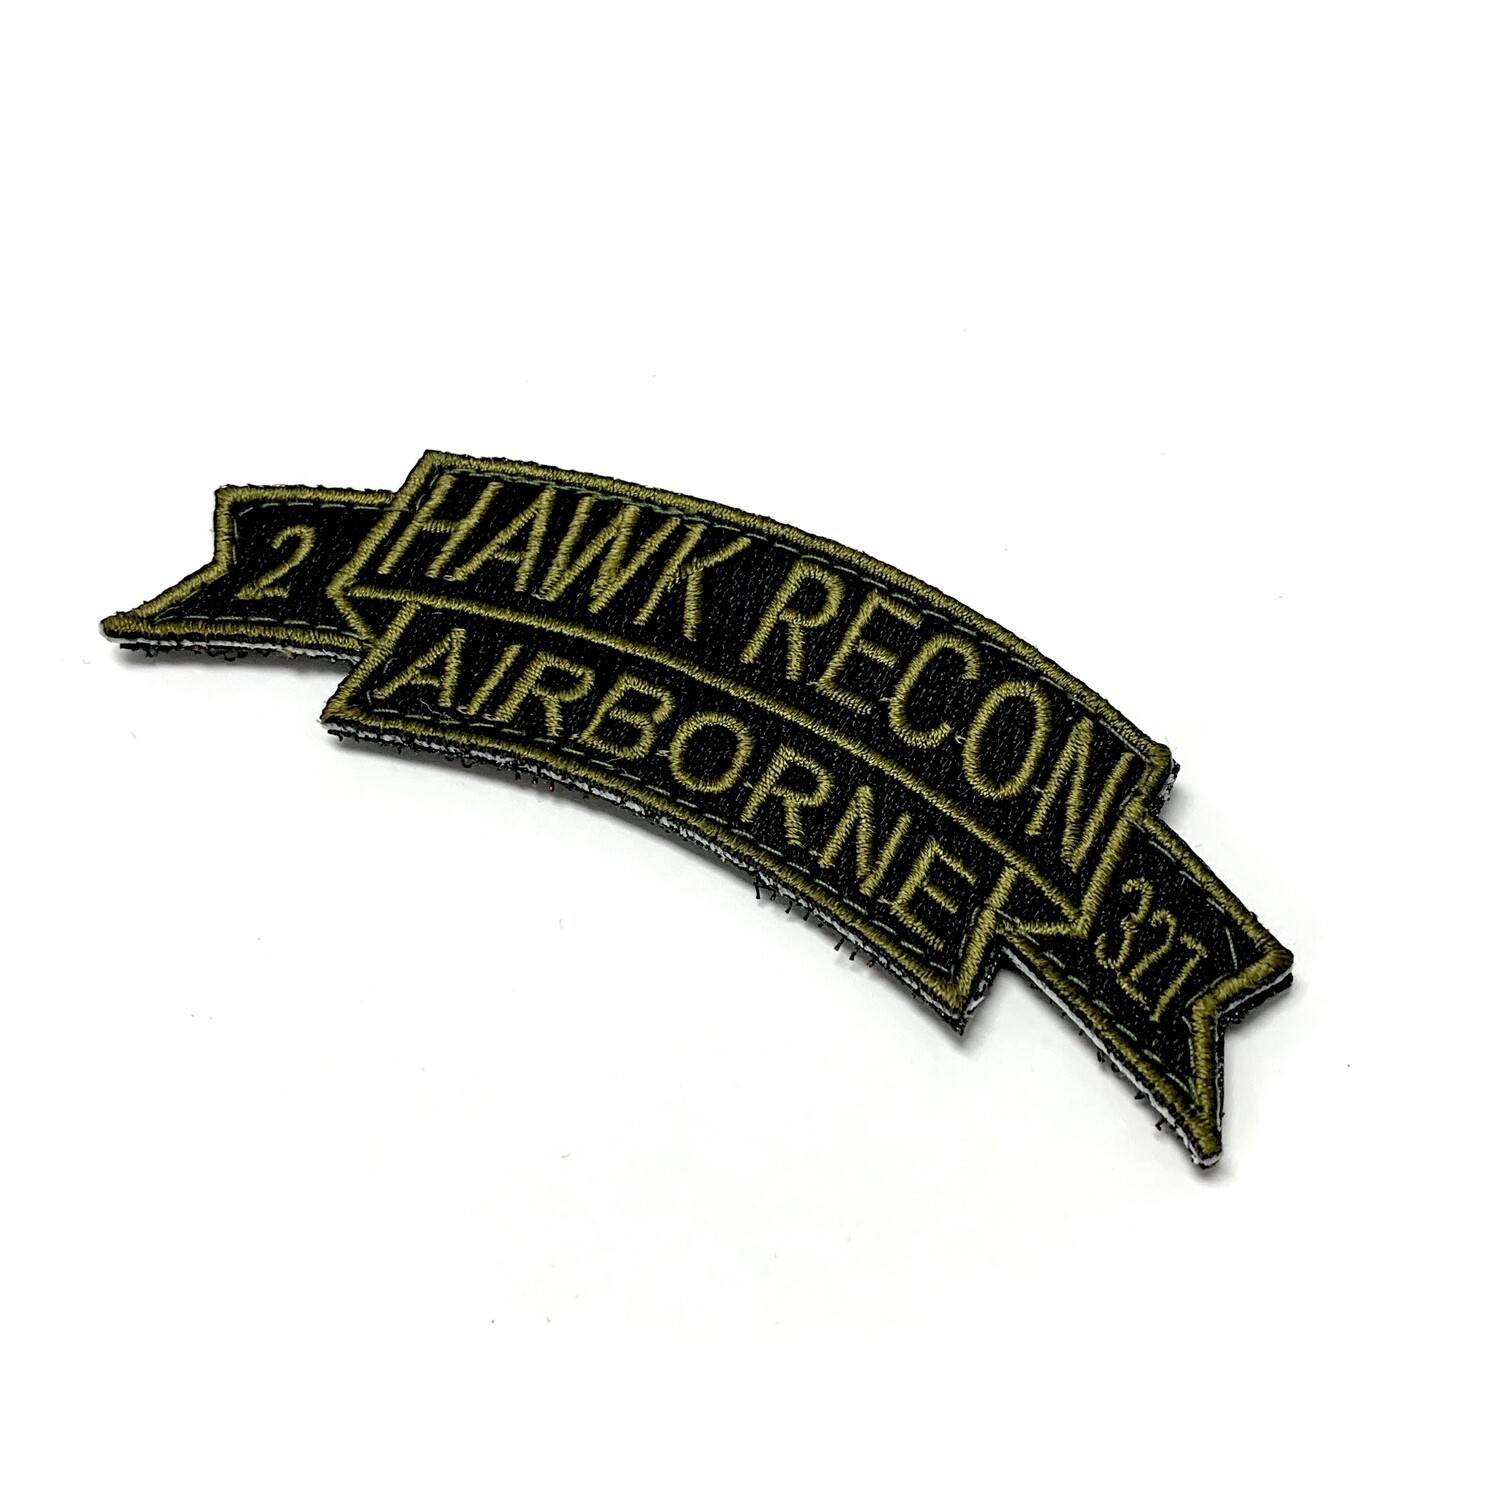 Hawk Recon 2-327th INF Patch